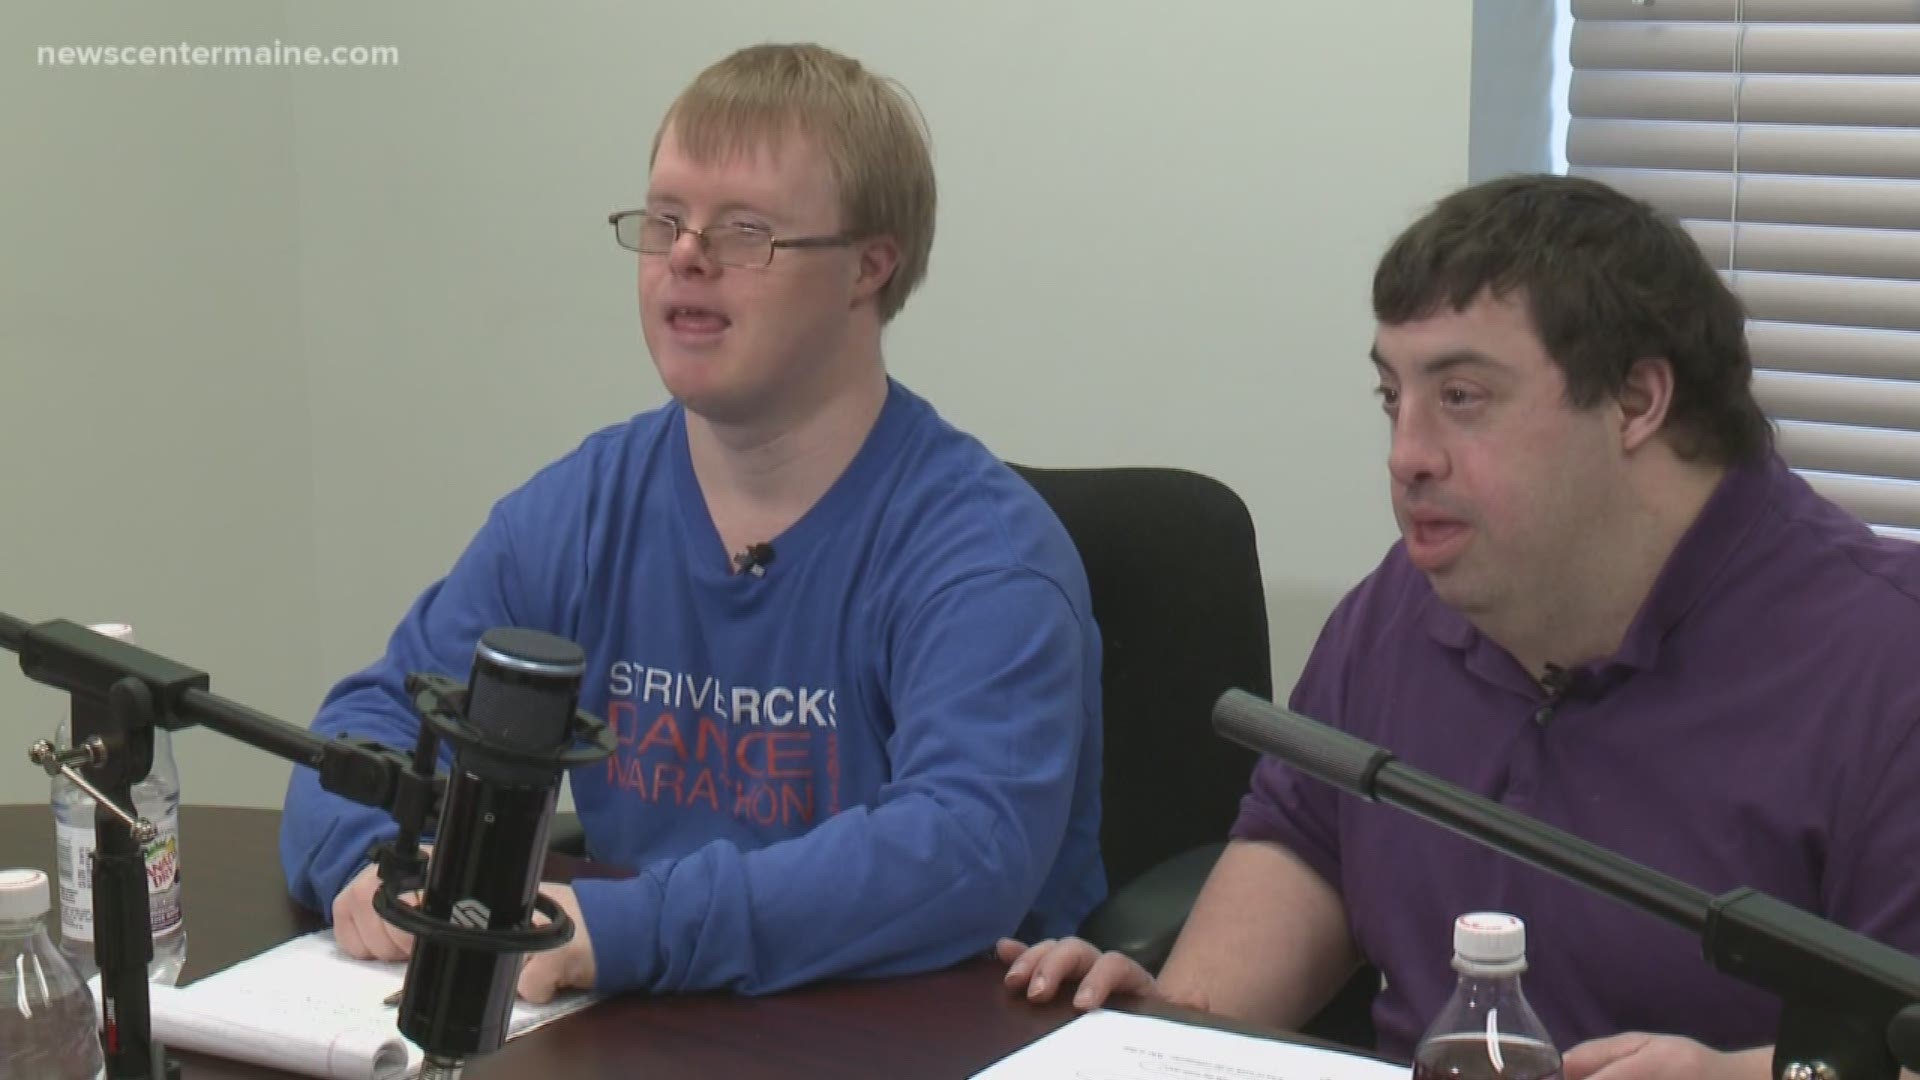 A new podcast created by STRIVE---a nonprofit organization in South Portland, serves tweens, teens and young adults with intellectual disabilities.